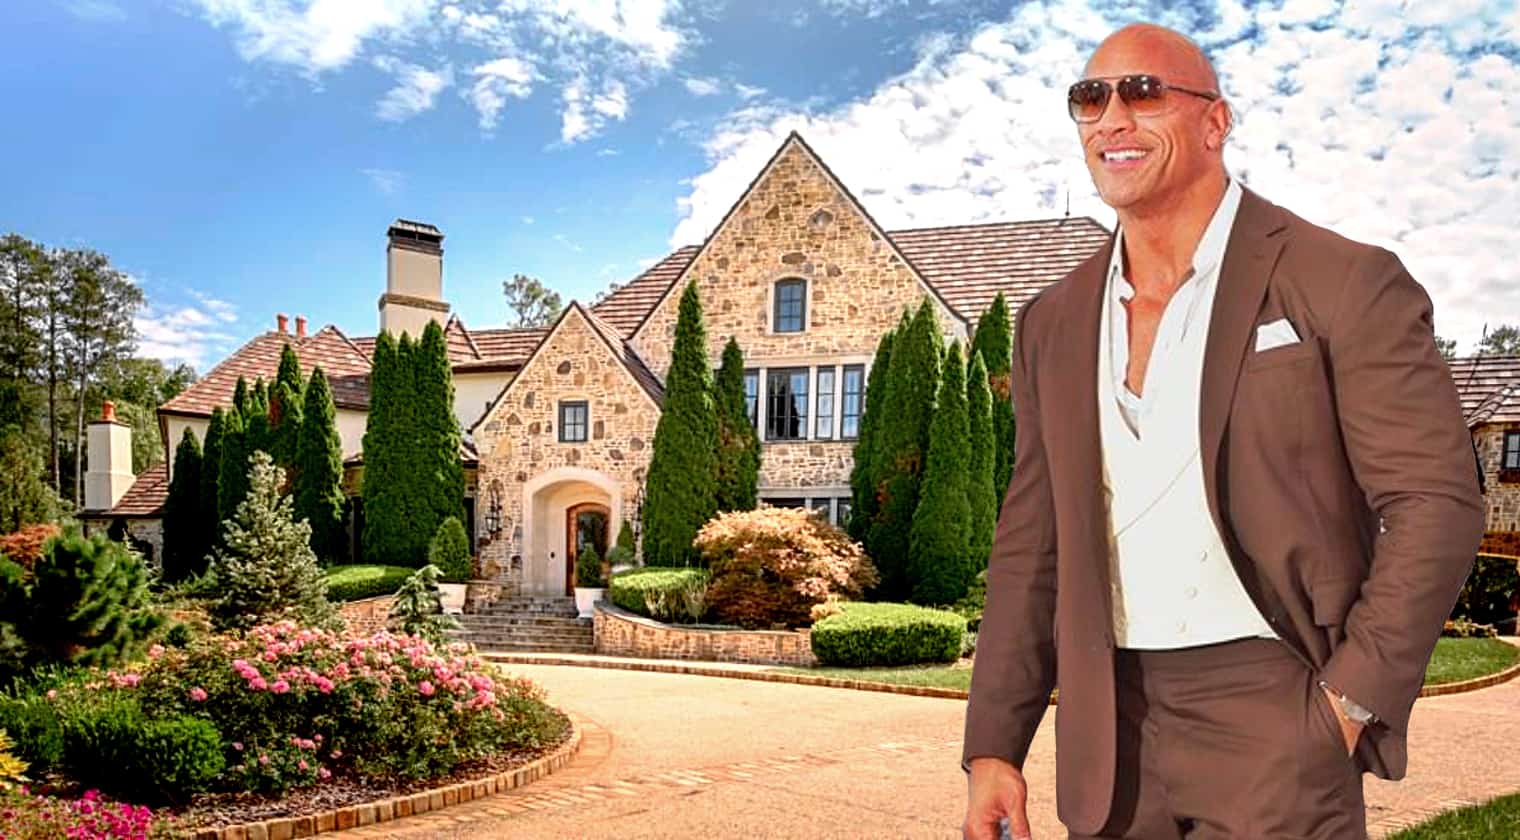 The Rock lists his incredible home for 2mill less than purchase price